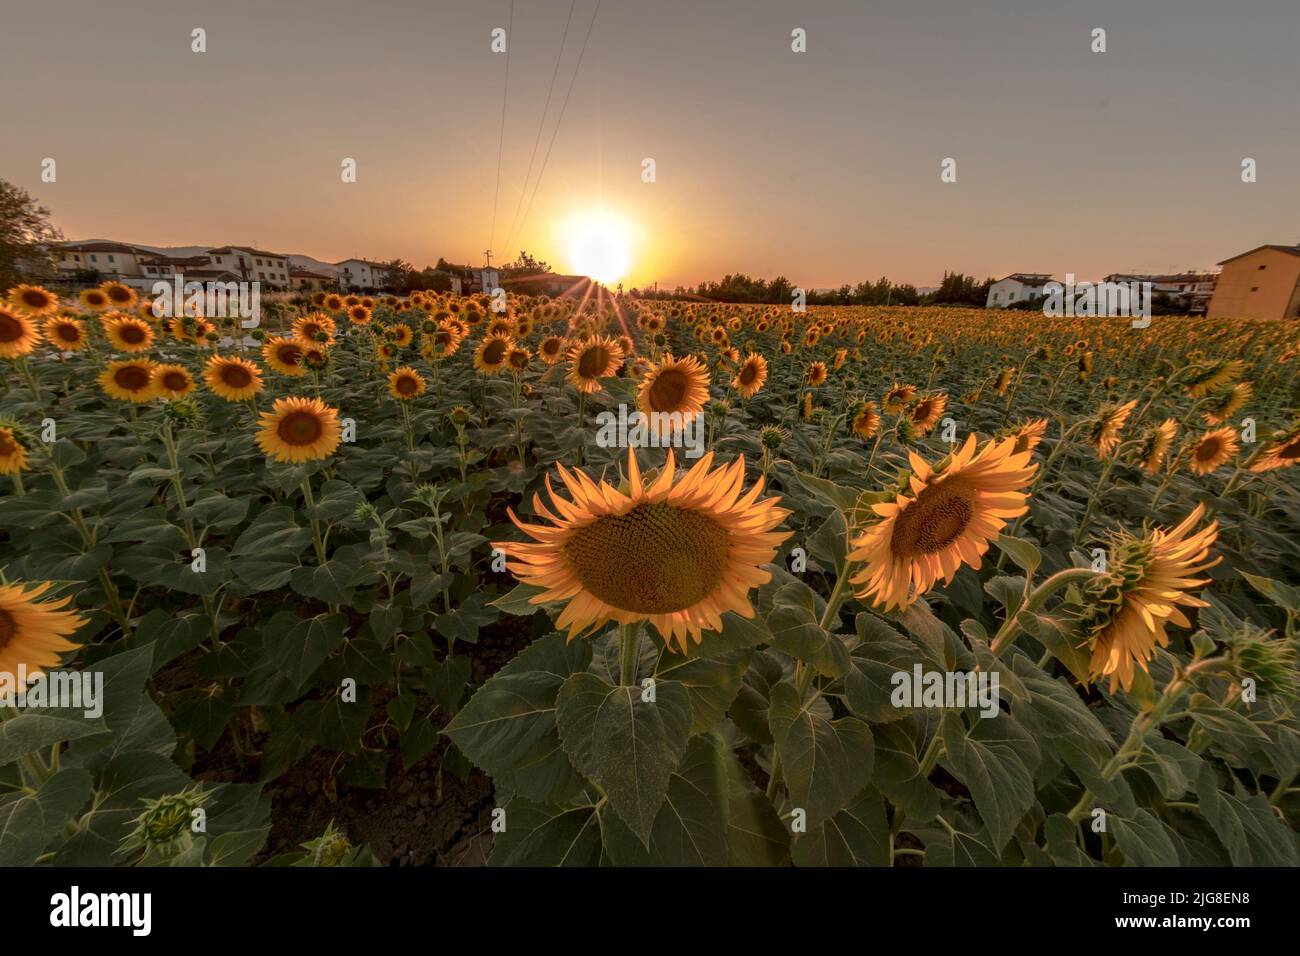 Beautiful sunflower field at sunset in the Tuscan countryside Stock Photo